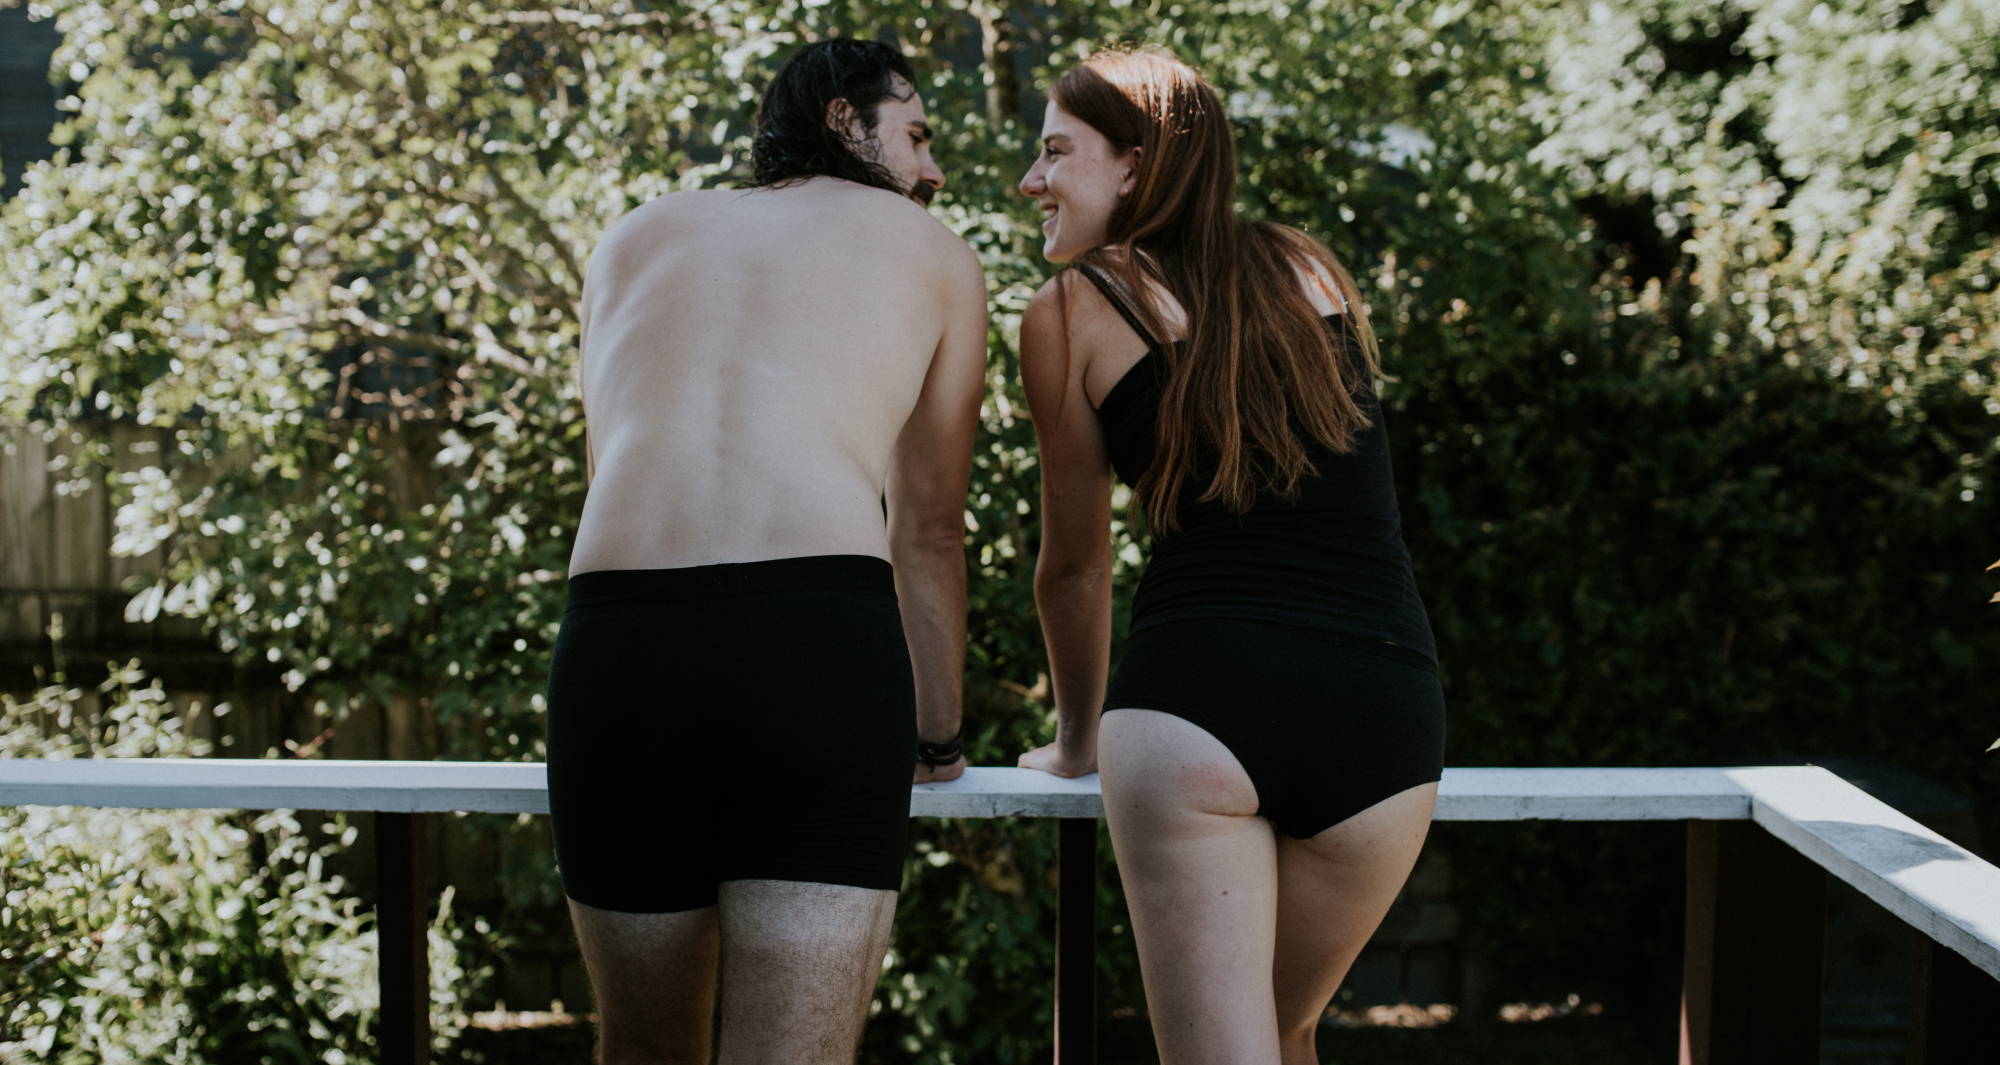 How often should you buy new underwear? A man and woman stand outside, leaning against a railing and smiling at one another.